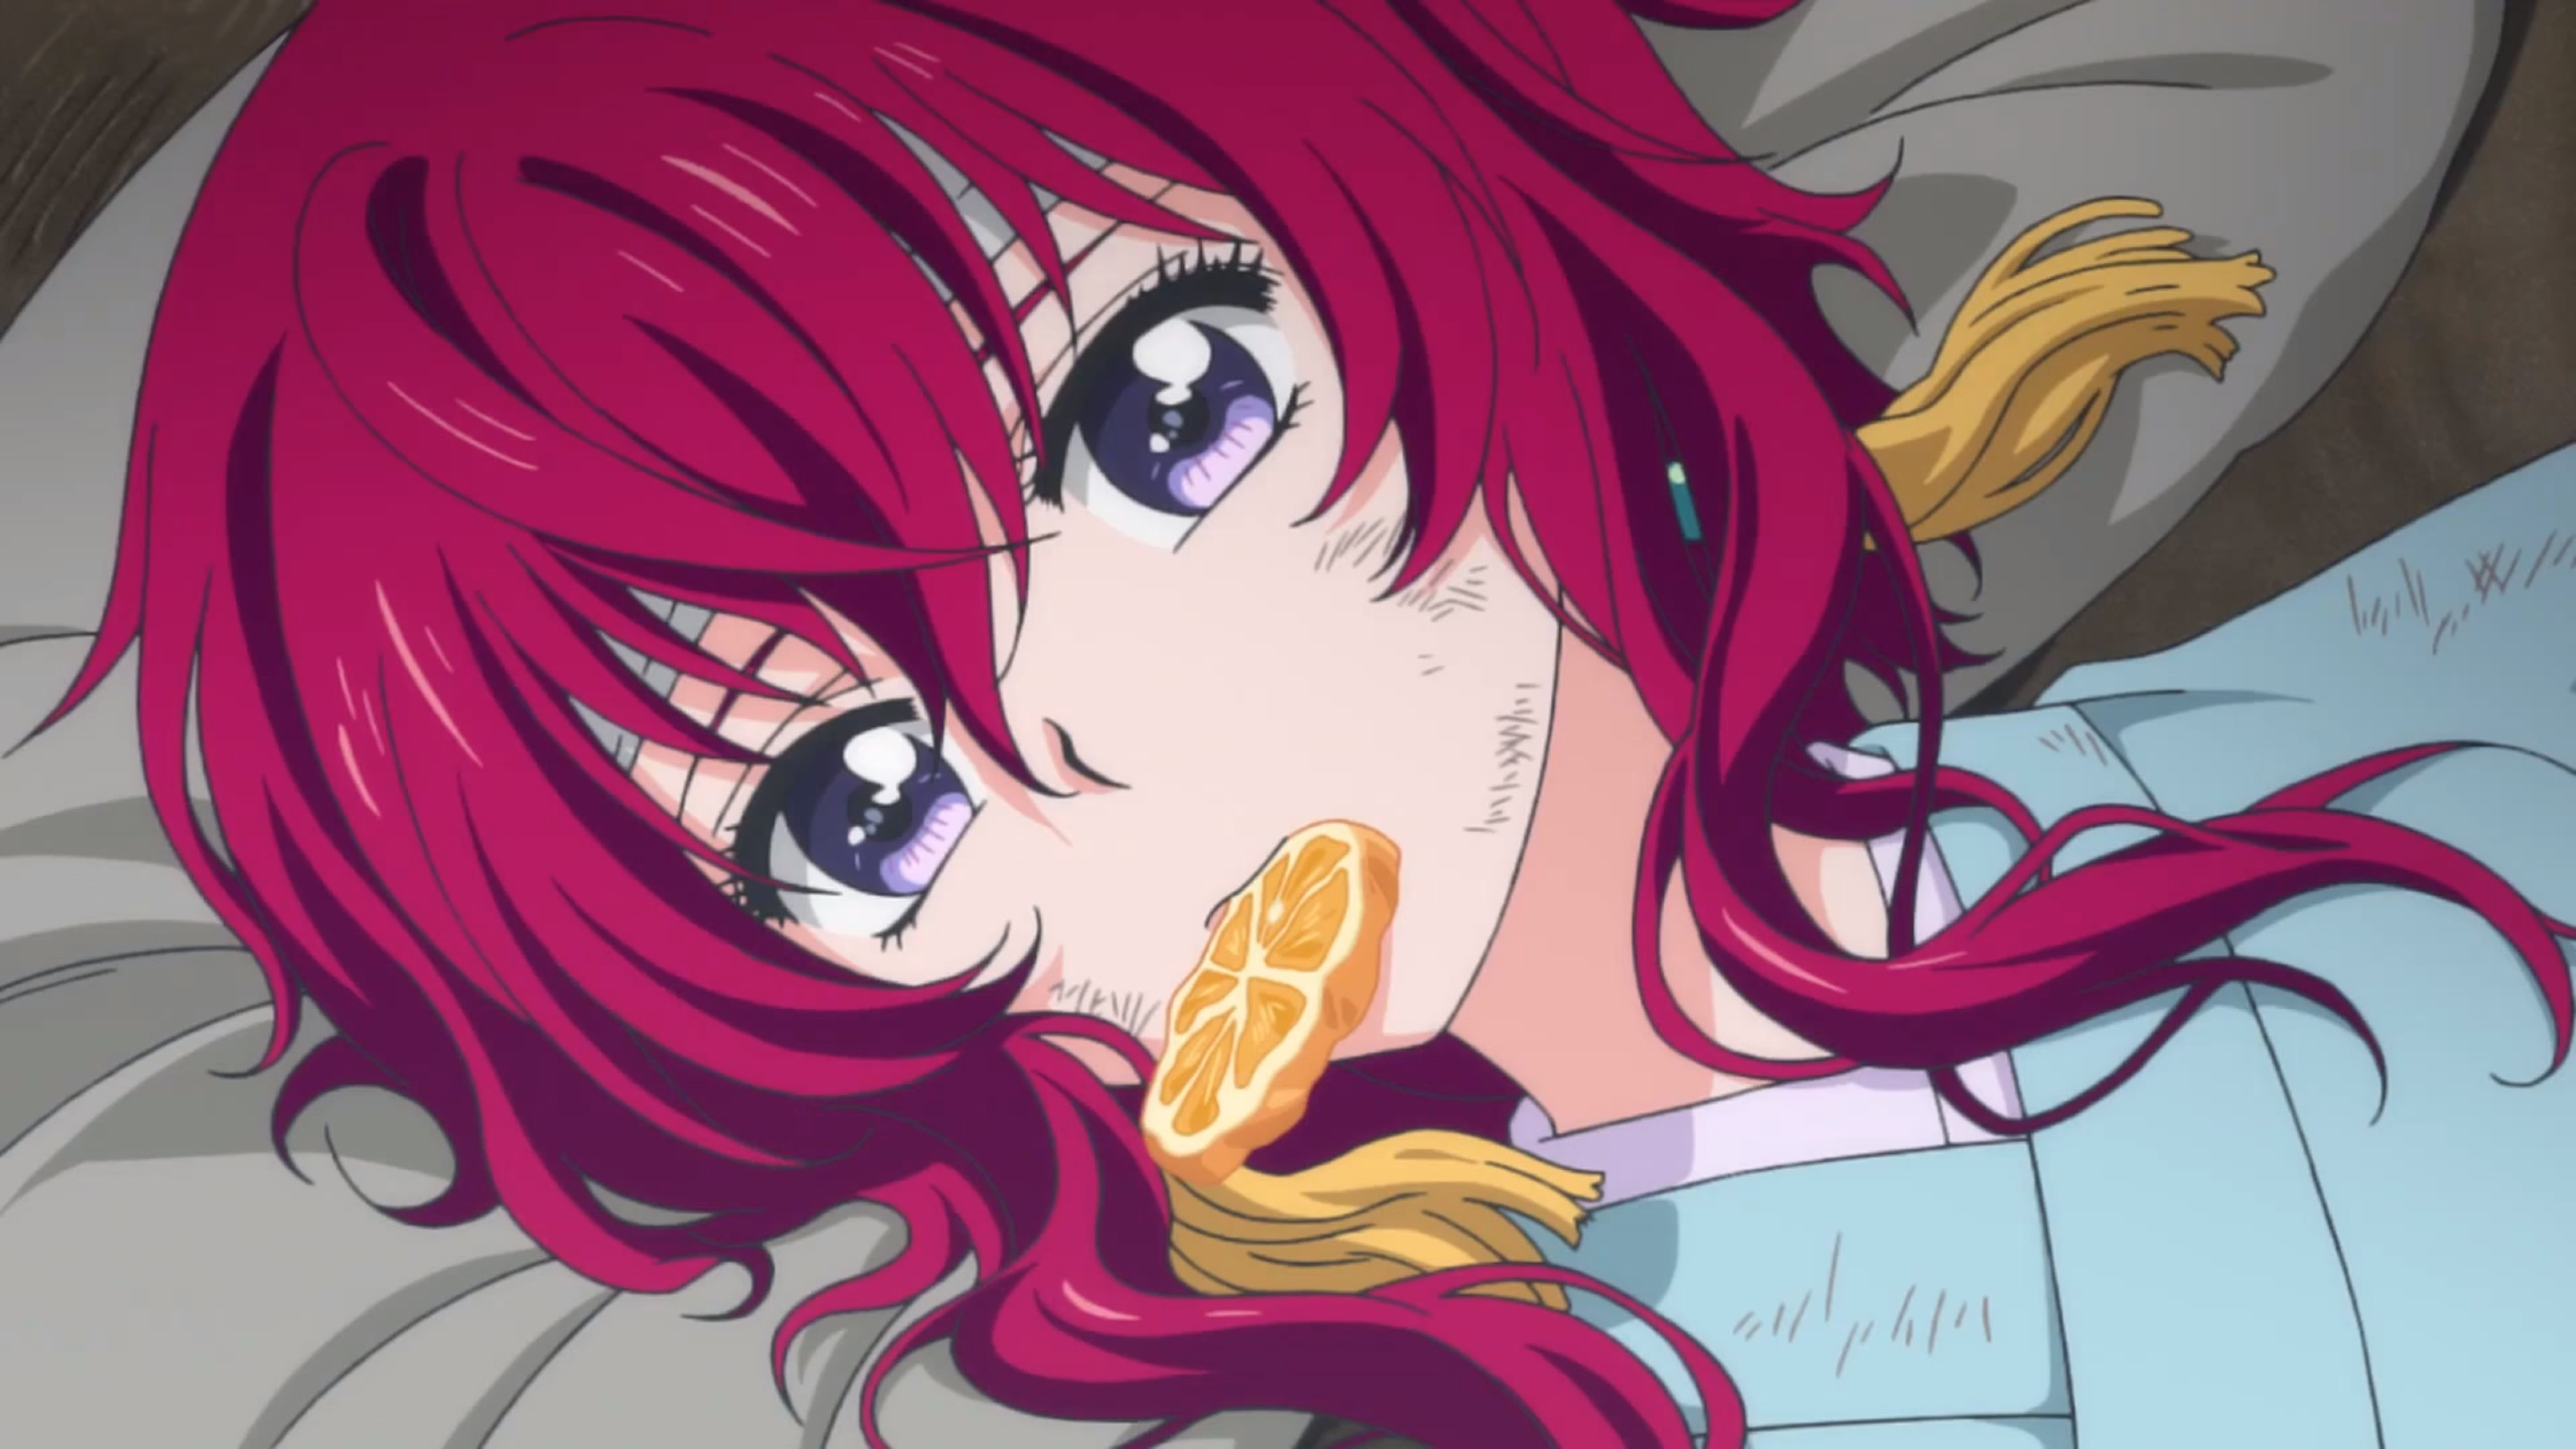 2880x1620 Anime Food Samples: For the Week of November 9, 2014 .